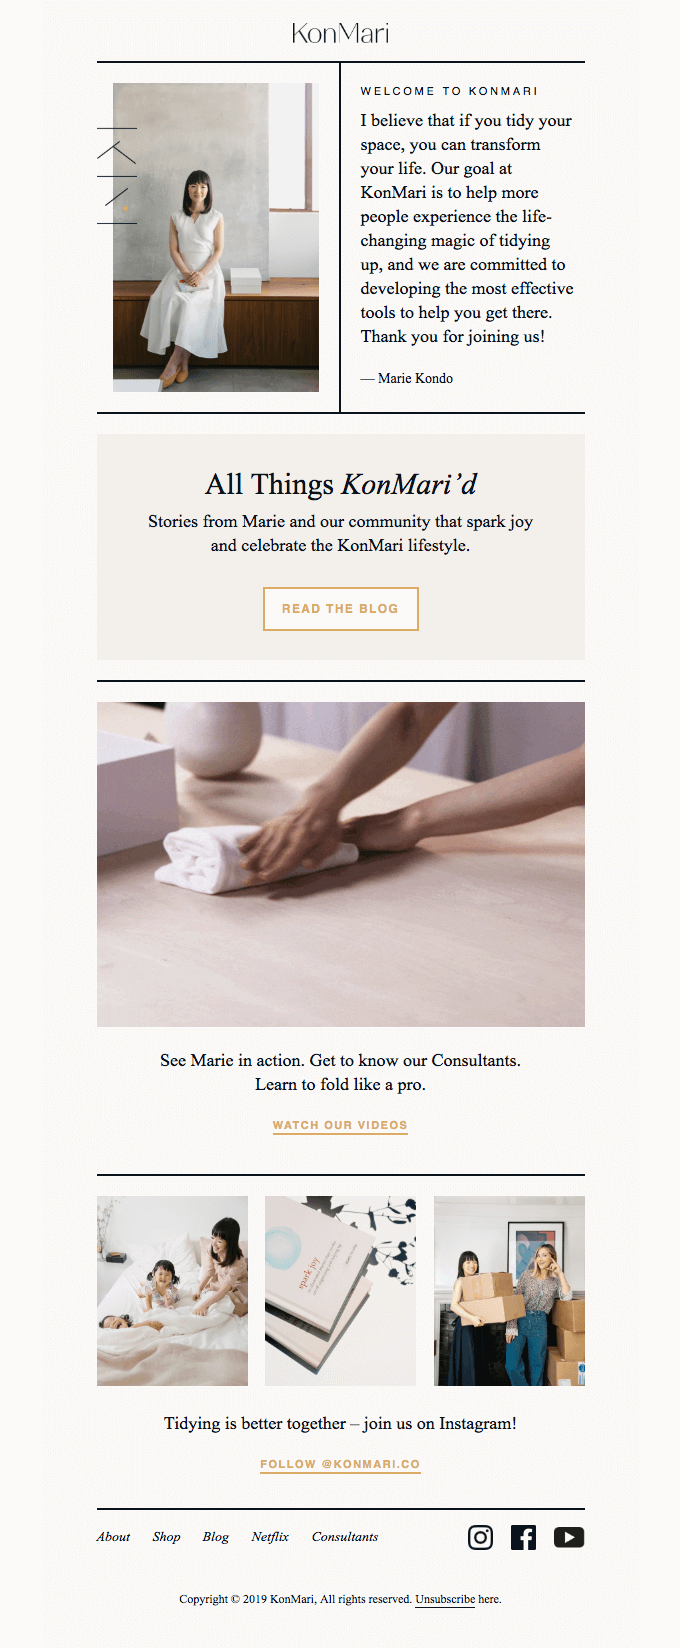 A welcome email by KonMari